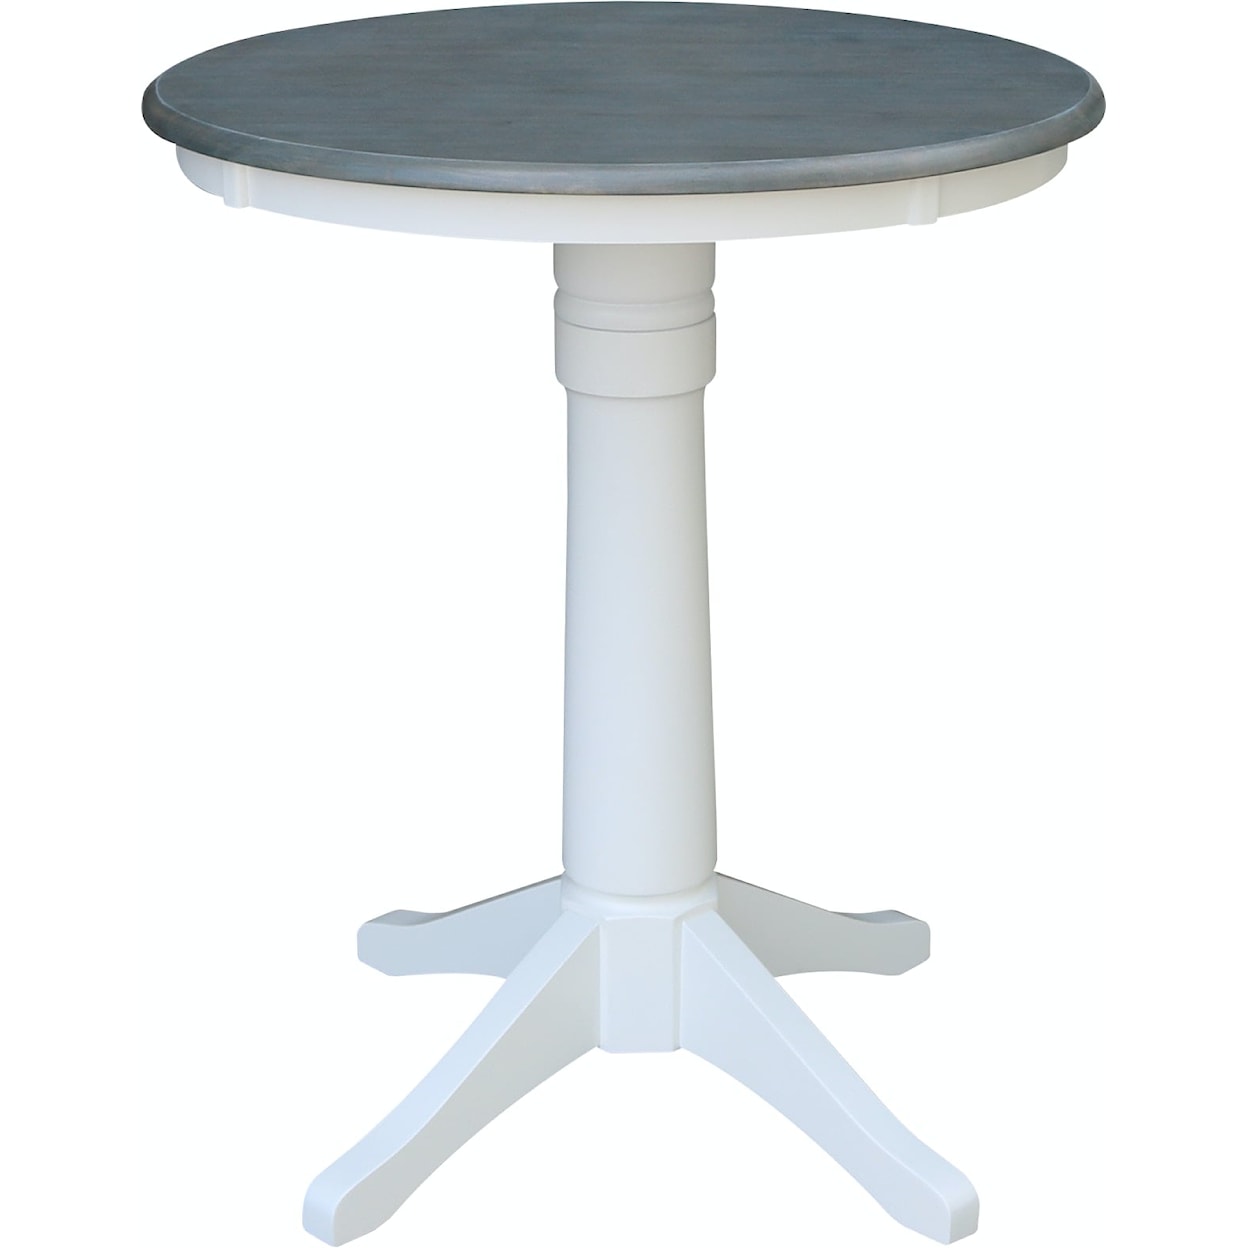 John Thomas Dining Essentials 30'' Pedestal Table in Heather Gray/White